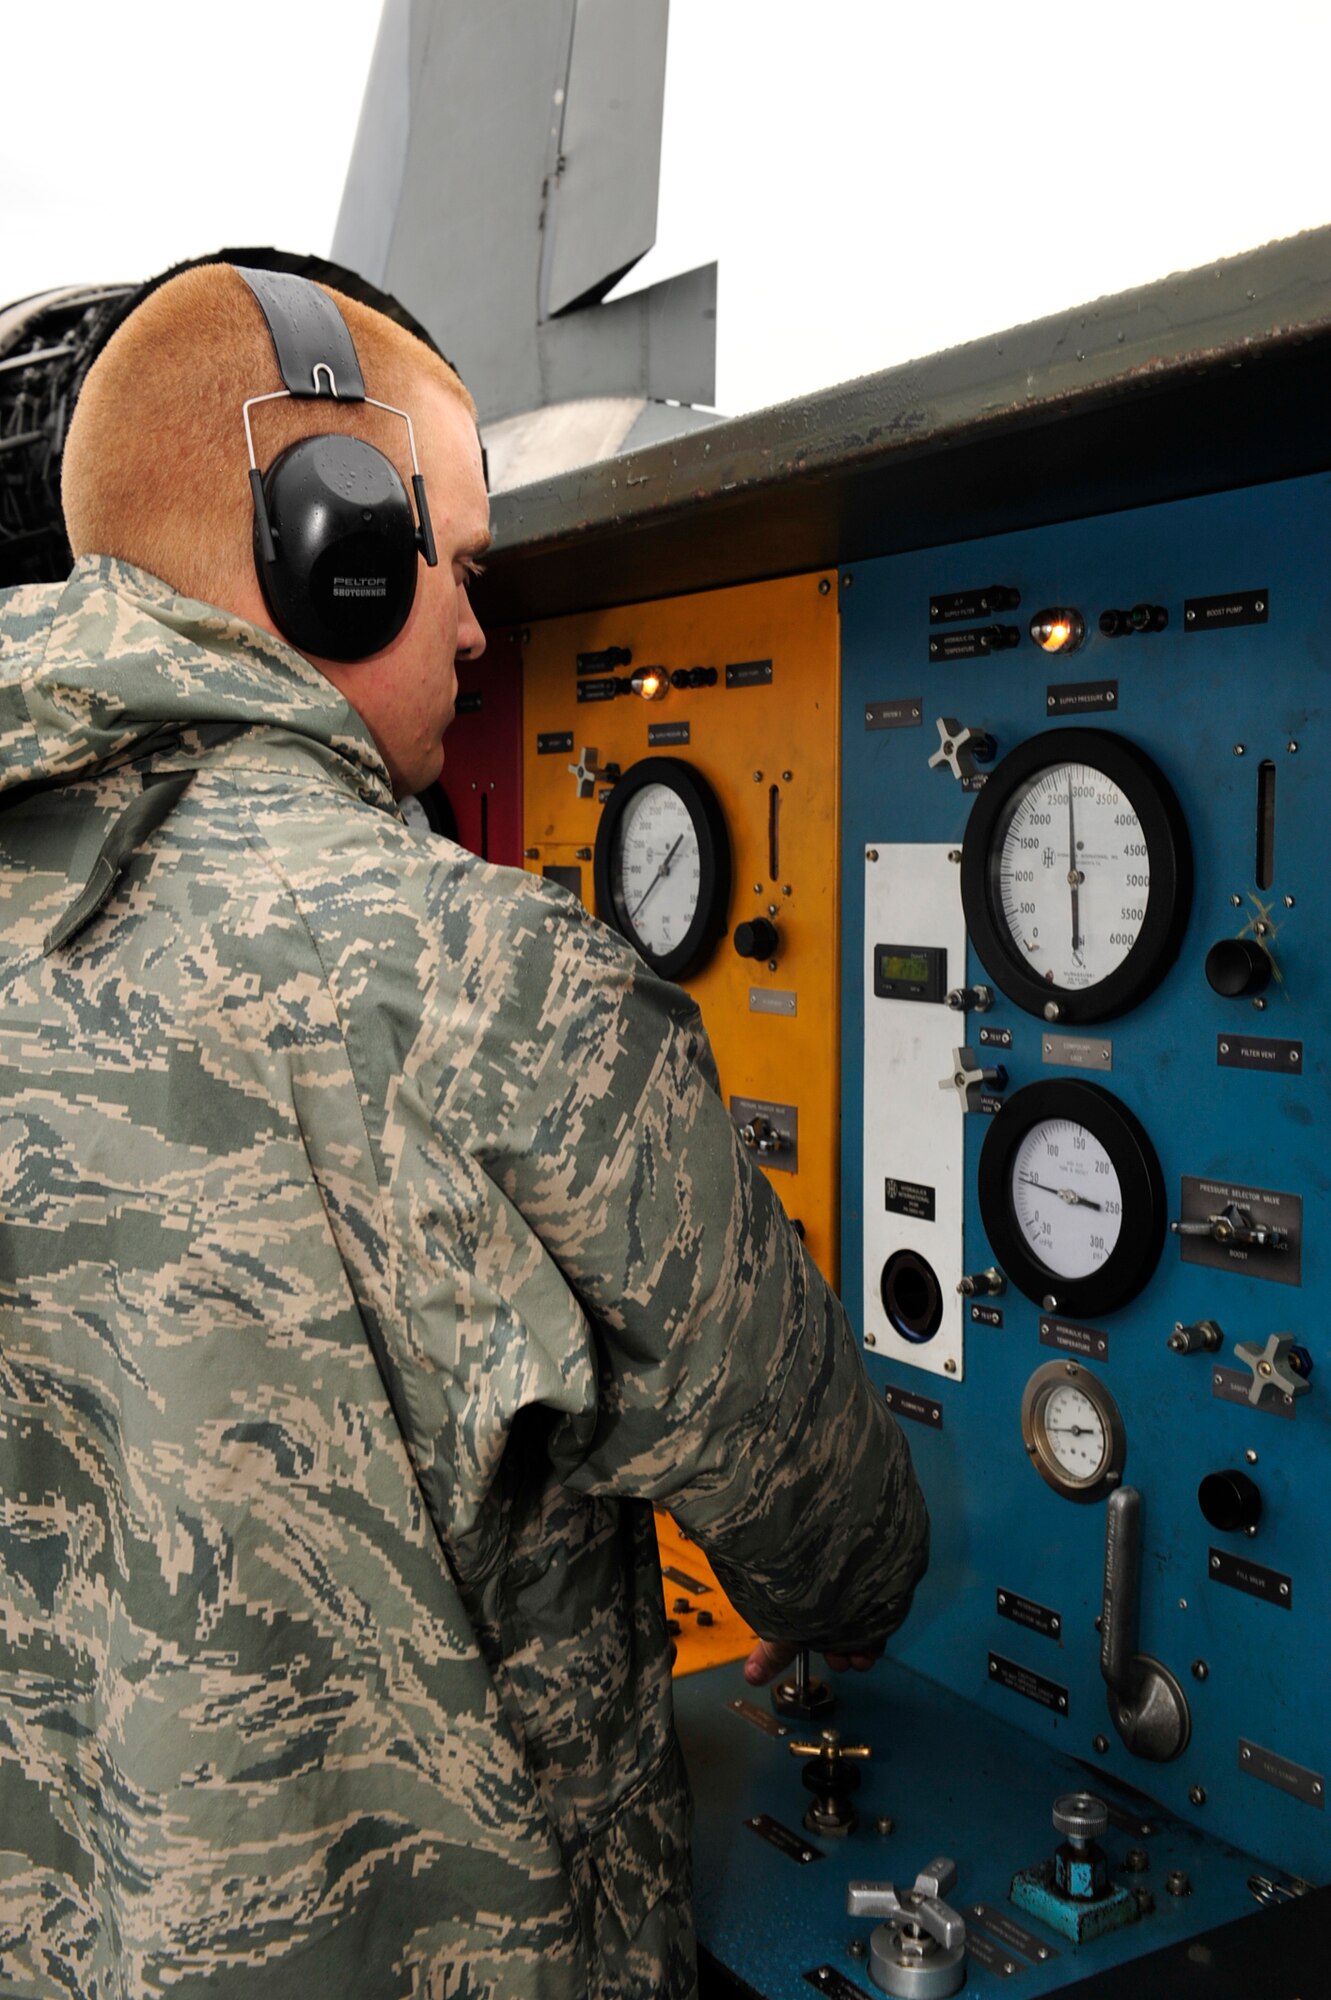 U.S. Air Force Airman 1st Class Kevin Buff, a crew chief with the 18th Aircraft Maintenance Squadron, Kadena Air Base, Japan, operates a hydraulic test stand during the Northern Edge Premier Joint Training Exercise at Eielson Air Force Base, Alaska, June 20. More than 6,000 active duty, Reserve and National Guard personnel are participating in Northern Edge 2011. (U.S. Air Force photo/ Staff Sgt. Lakisha A. Croley)